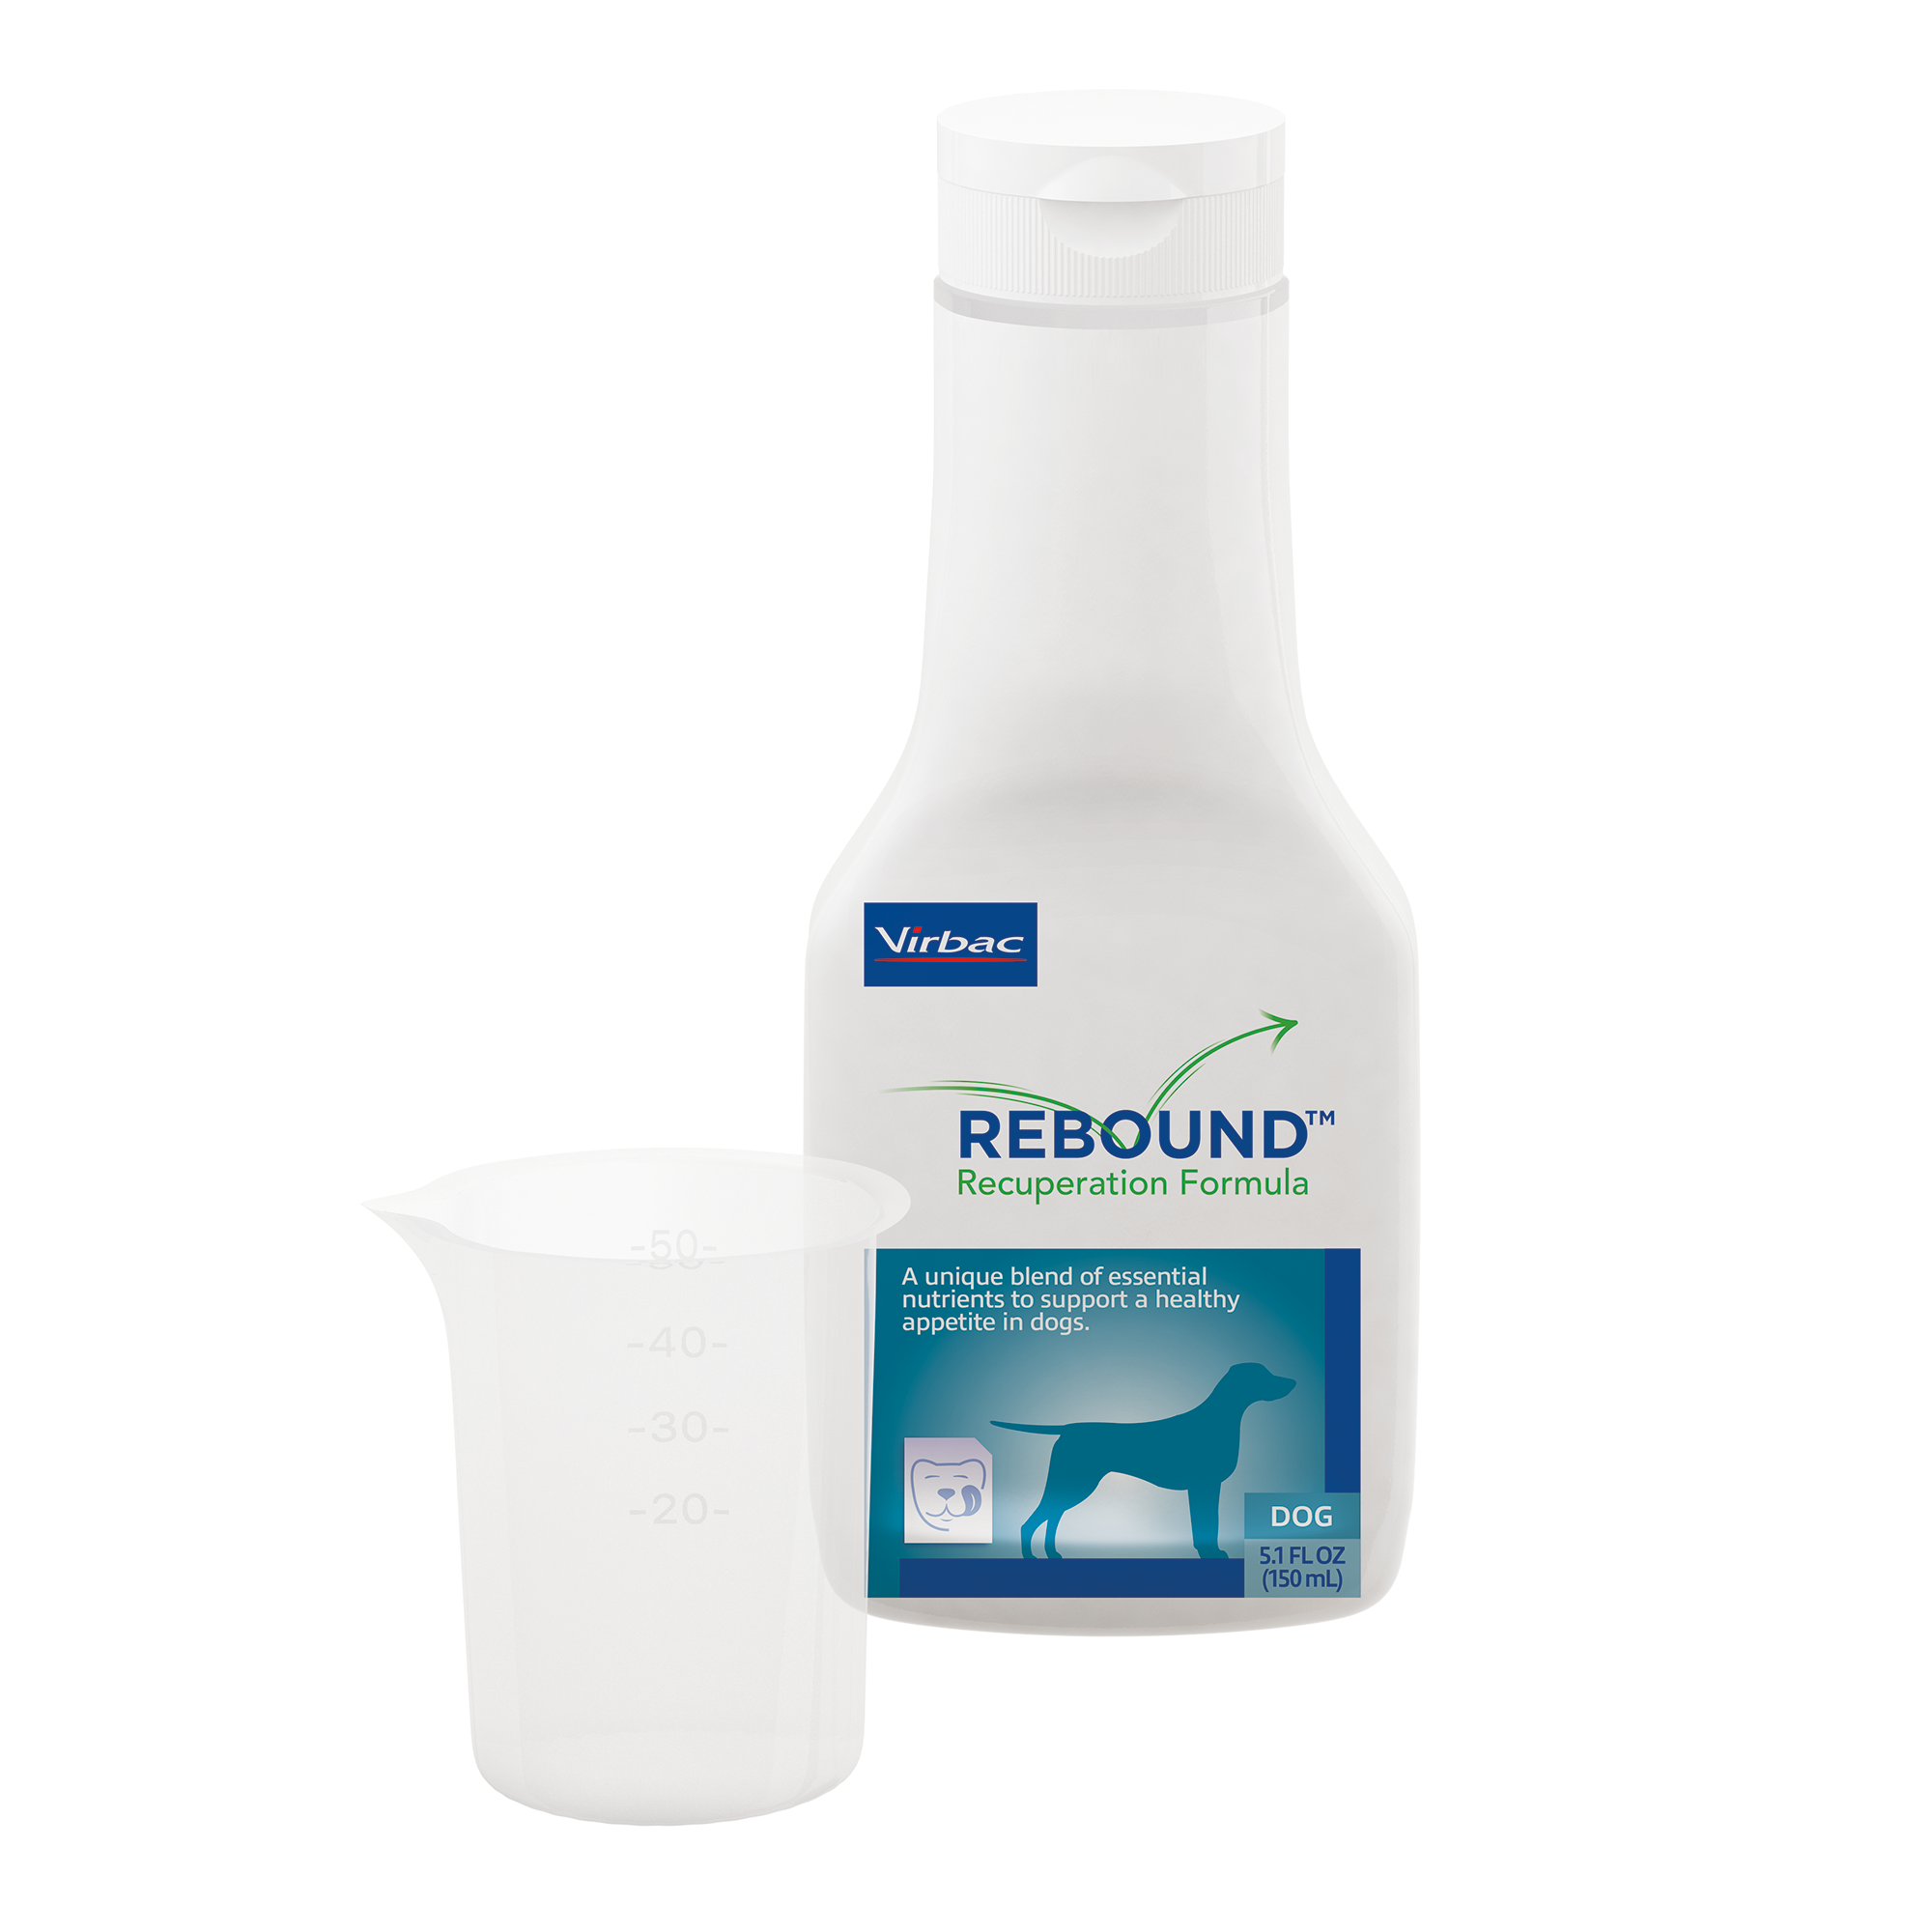 REBOUND® Recuperation Formula for Cats